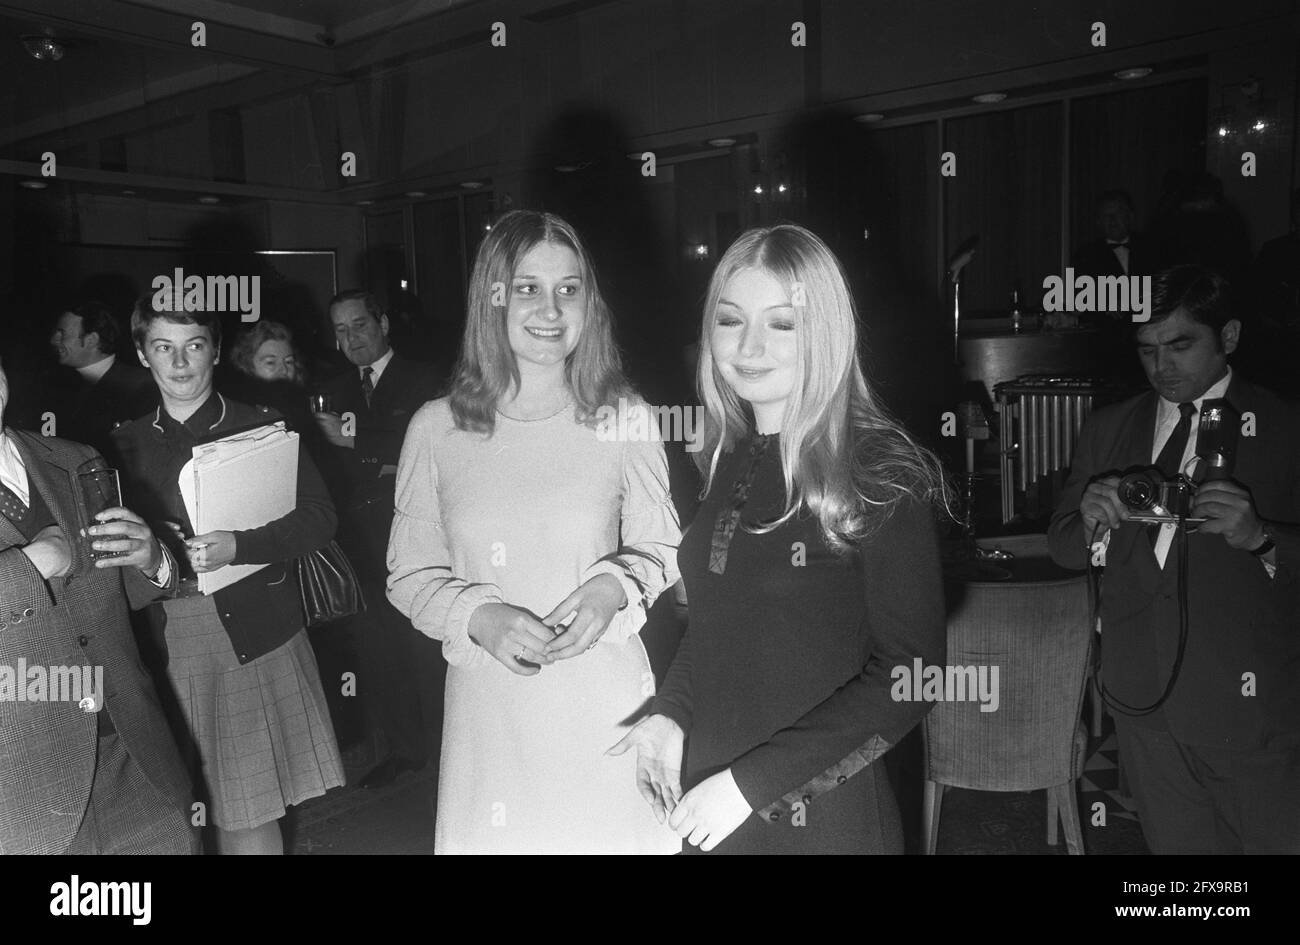 Mayor Samkalden receives participants of Eurovision Song Festival at Hotel Kras in Amsterdam. Eva Sršen and Mary Hopkin, March 19, 1970, artists, song festivals, The Netherlands, 20th century press agency photo, news to remember, documentary, historic photography 1945-1990, visual stories, human history of the Twentieth Century, capturing moments in time Stock Photo